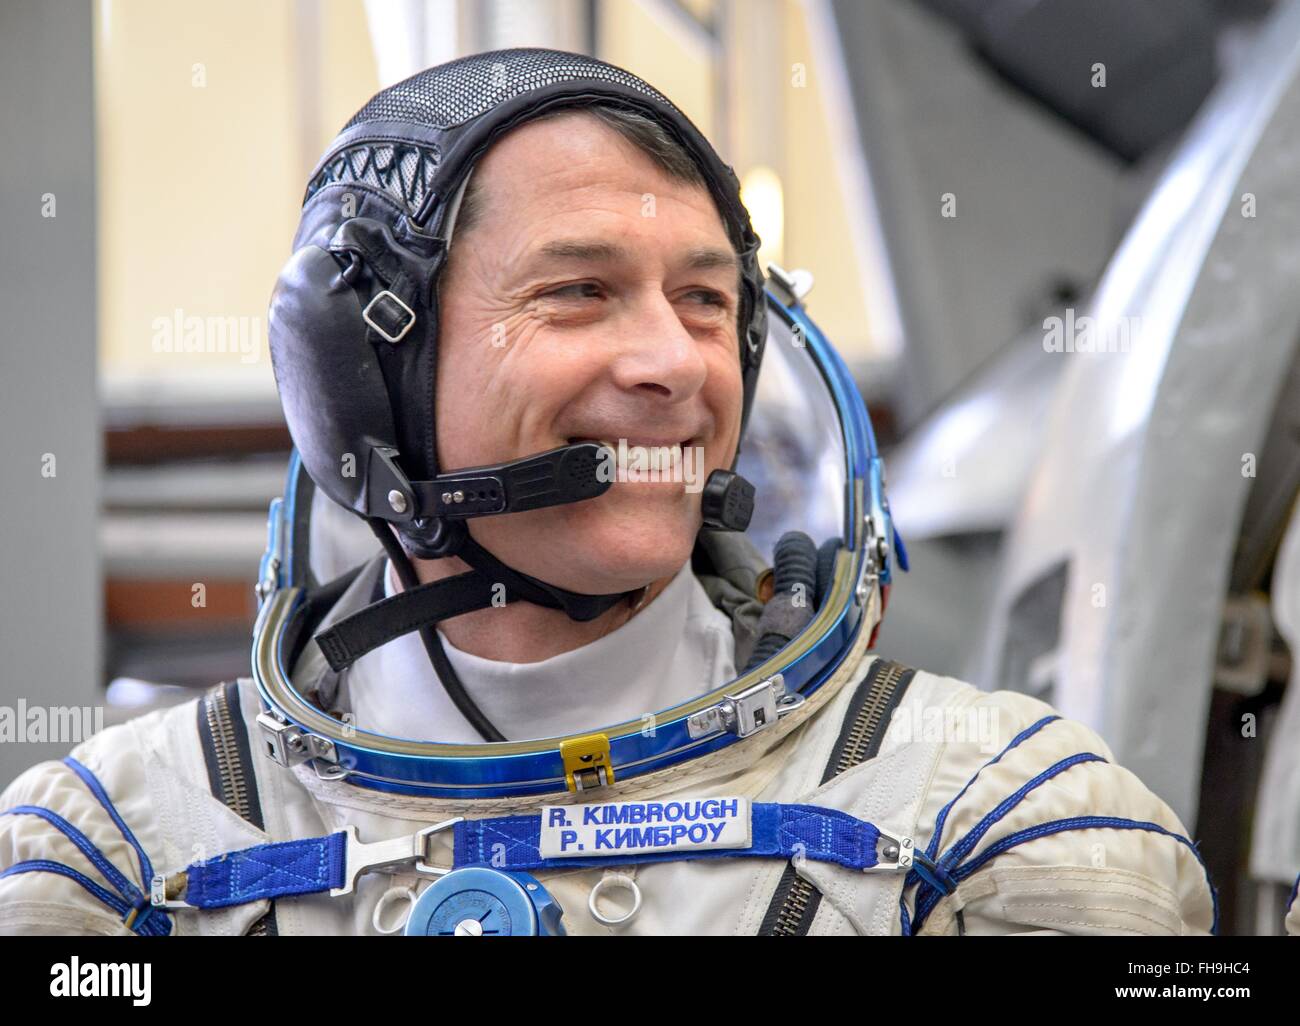 International Space Station Expedition 47 backup crew member American astronaut Shane Kimbroug answers questions from the press ahead of his Soyuz qualification exams at the Gagarin Cosmonaut Training Center February 24, 2016 in Star City, Russia. Stock Photo